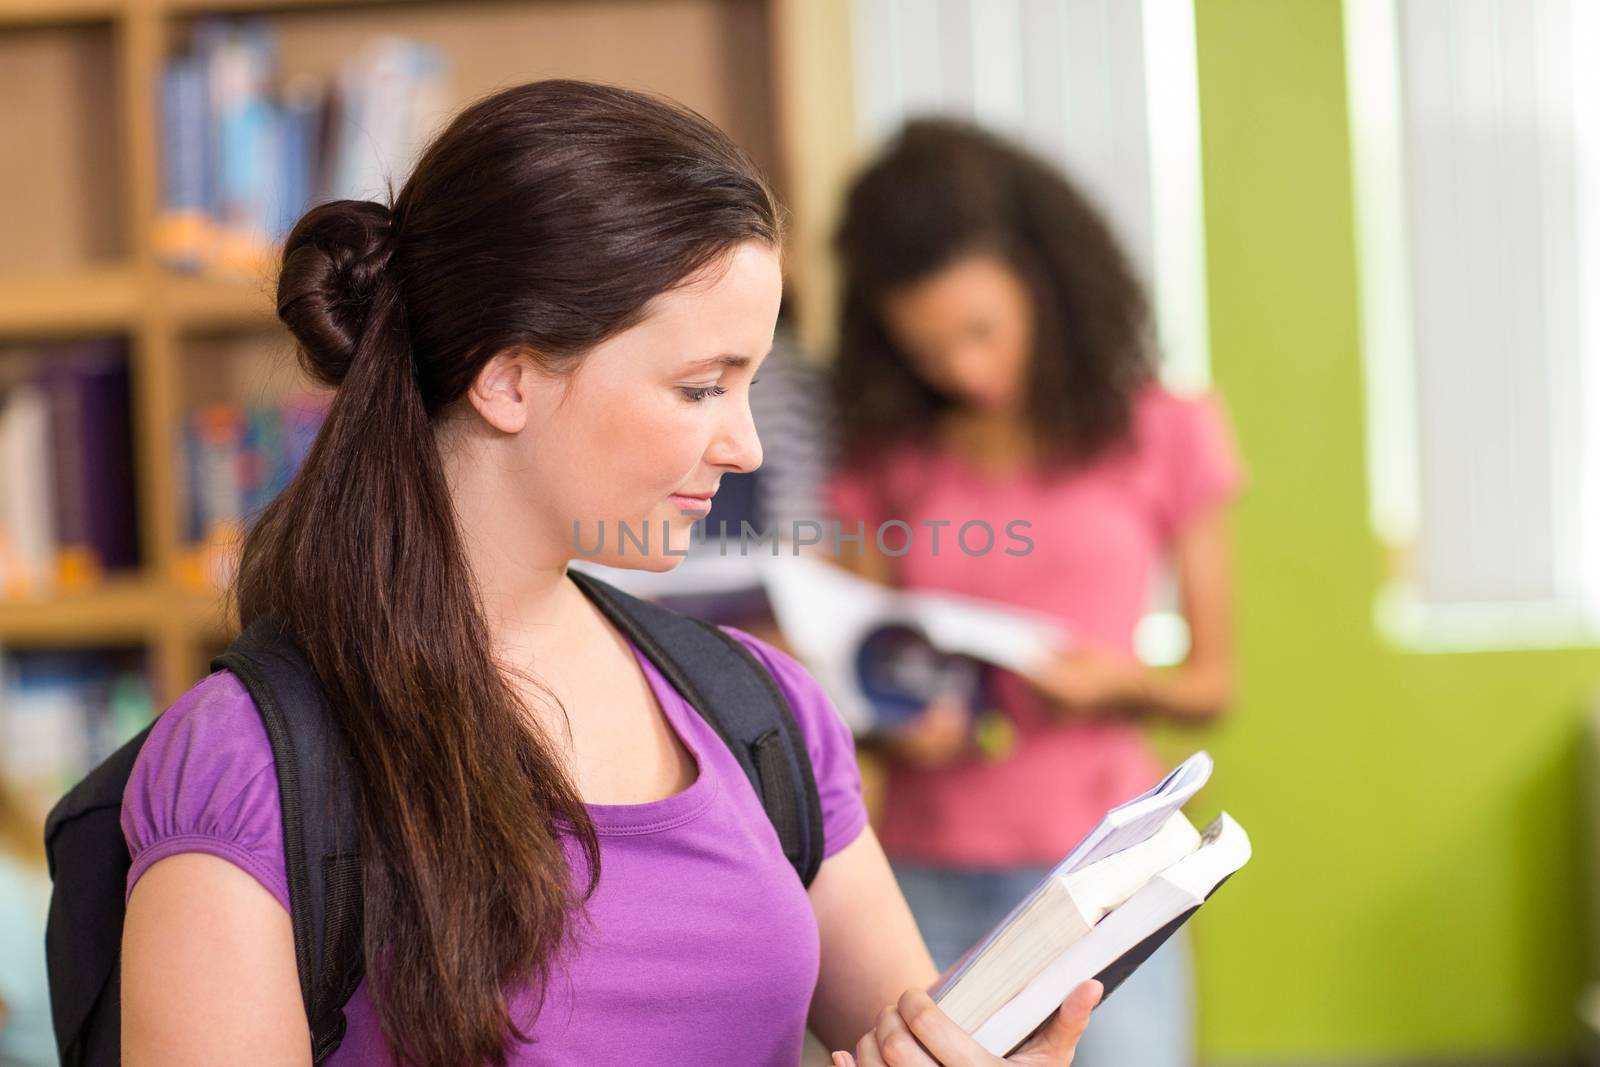 Two college students reading books in the library